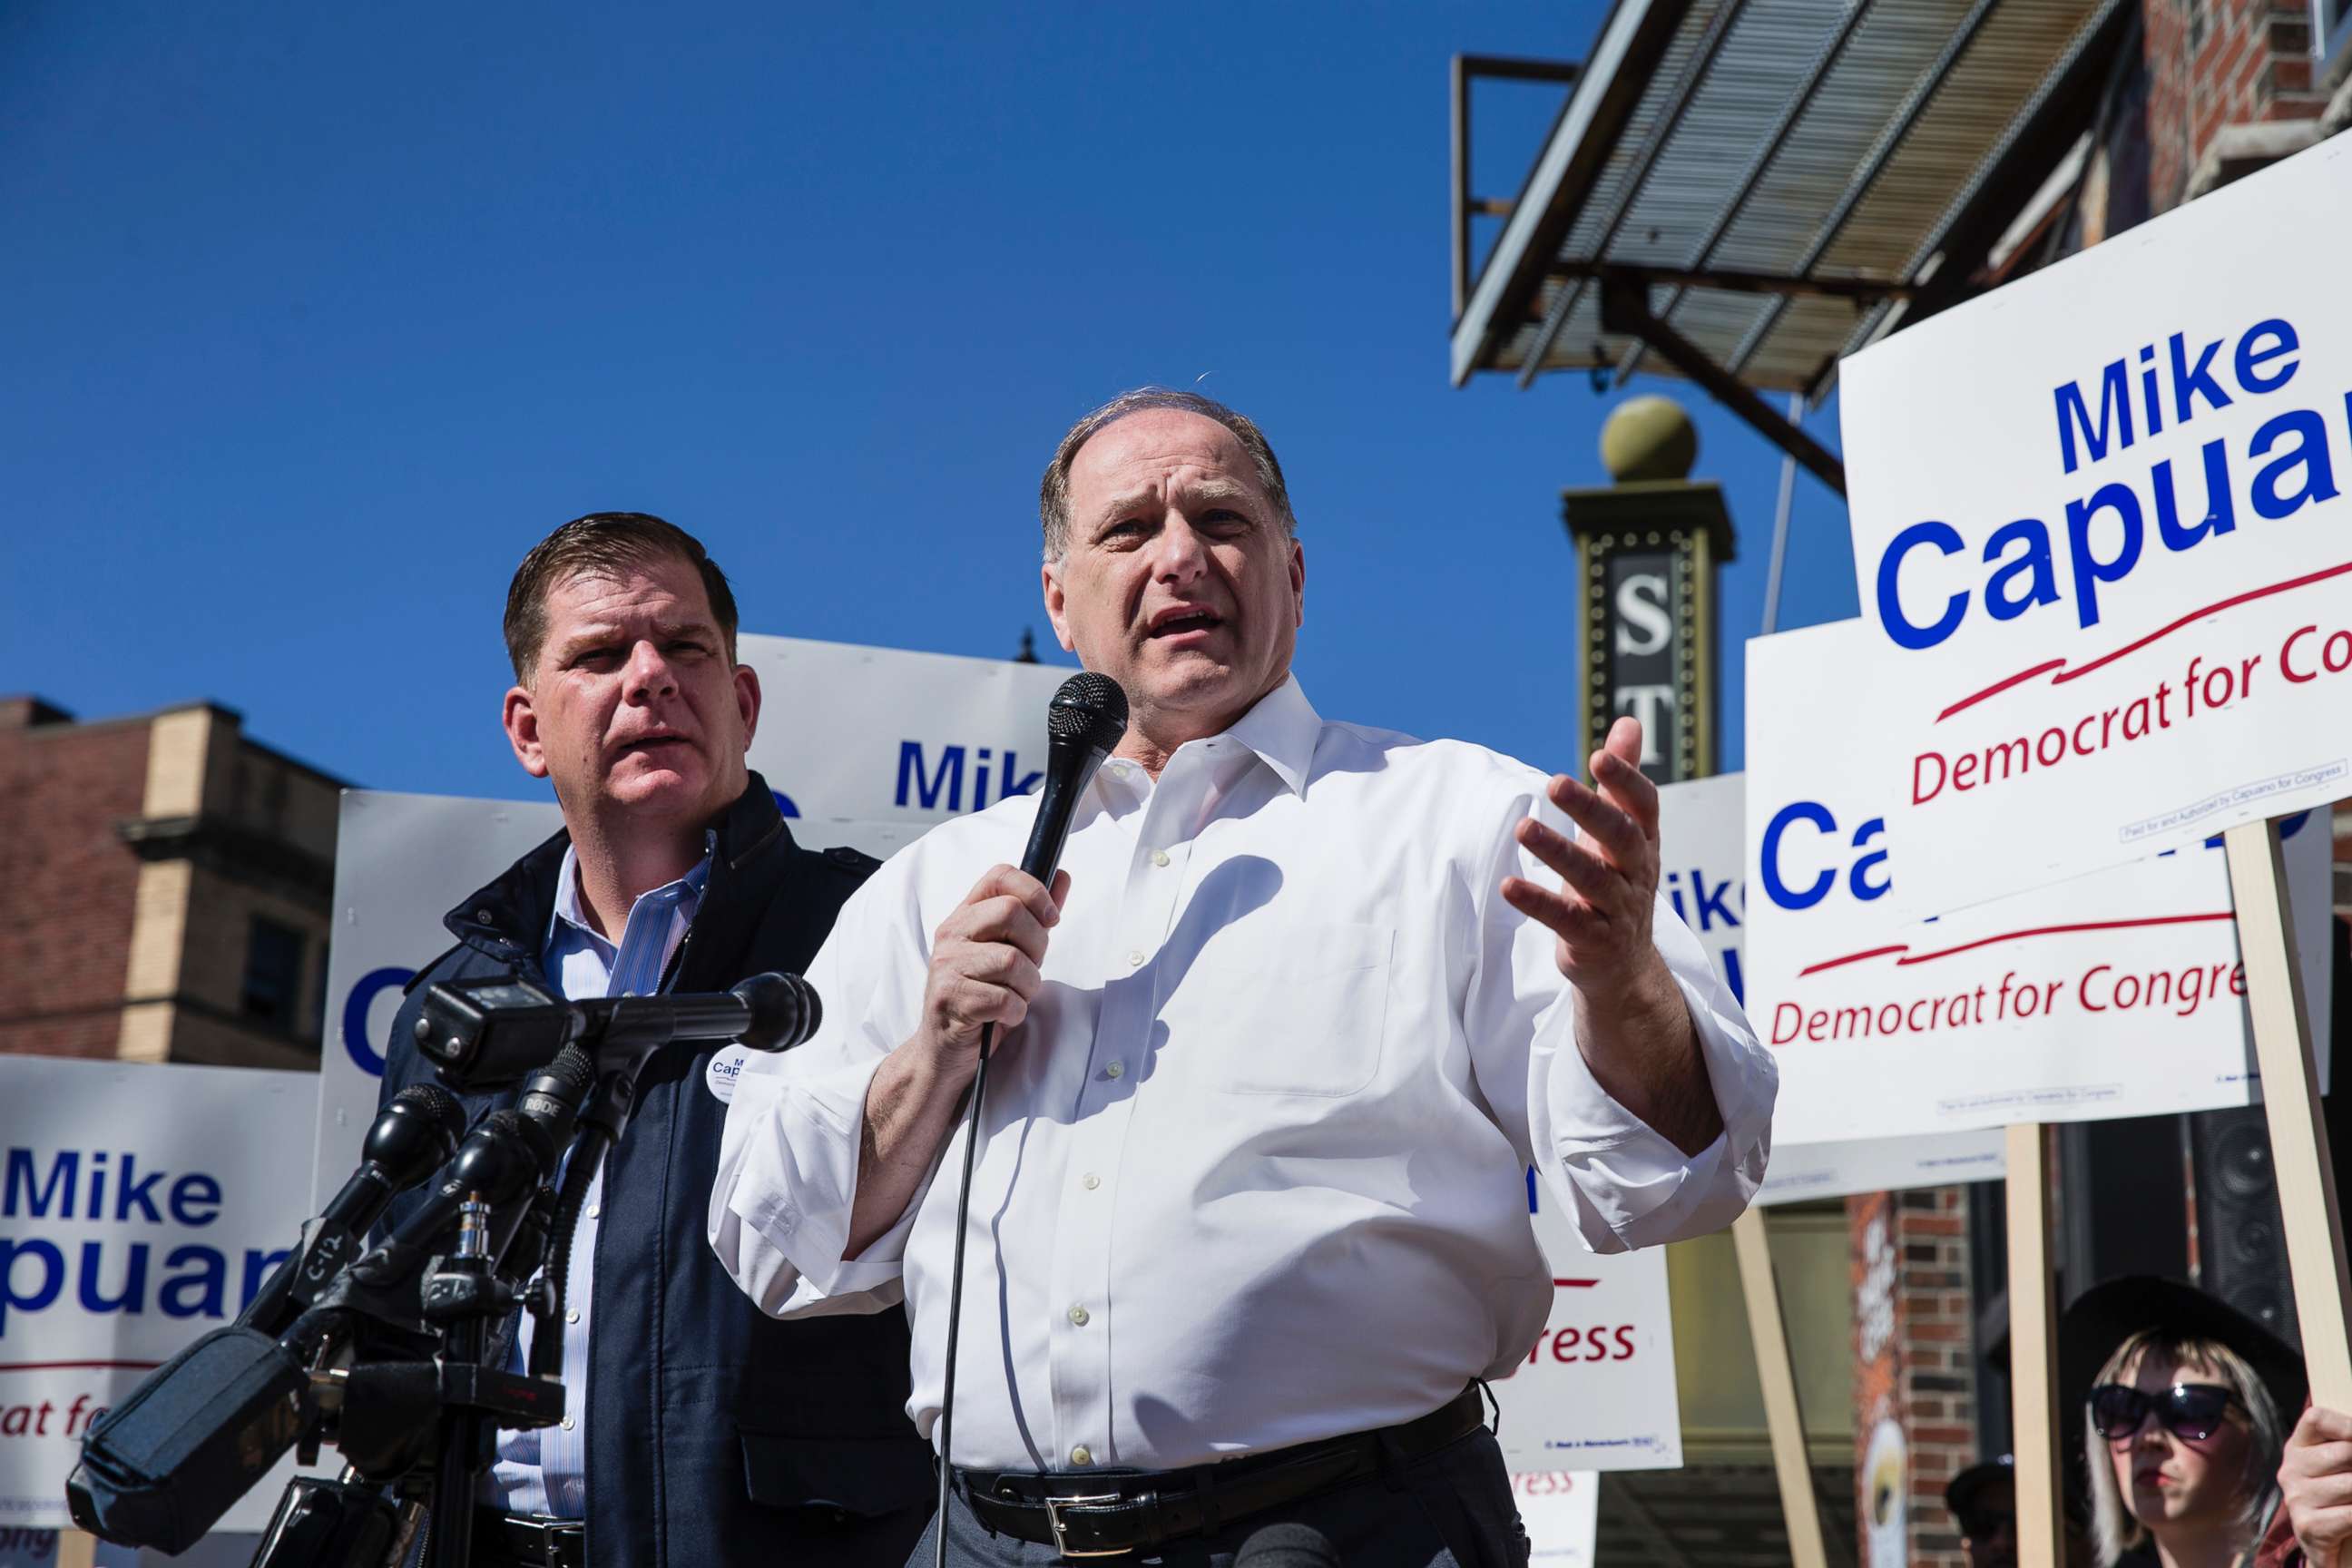 PHOTO: Congressman Mike Capuano, right, speaks after being endorsed for re-election by Boston Mayor Martin J. Walsh, left, in Boston on April 22, 2018.